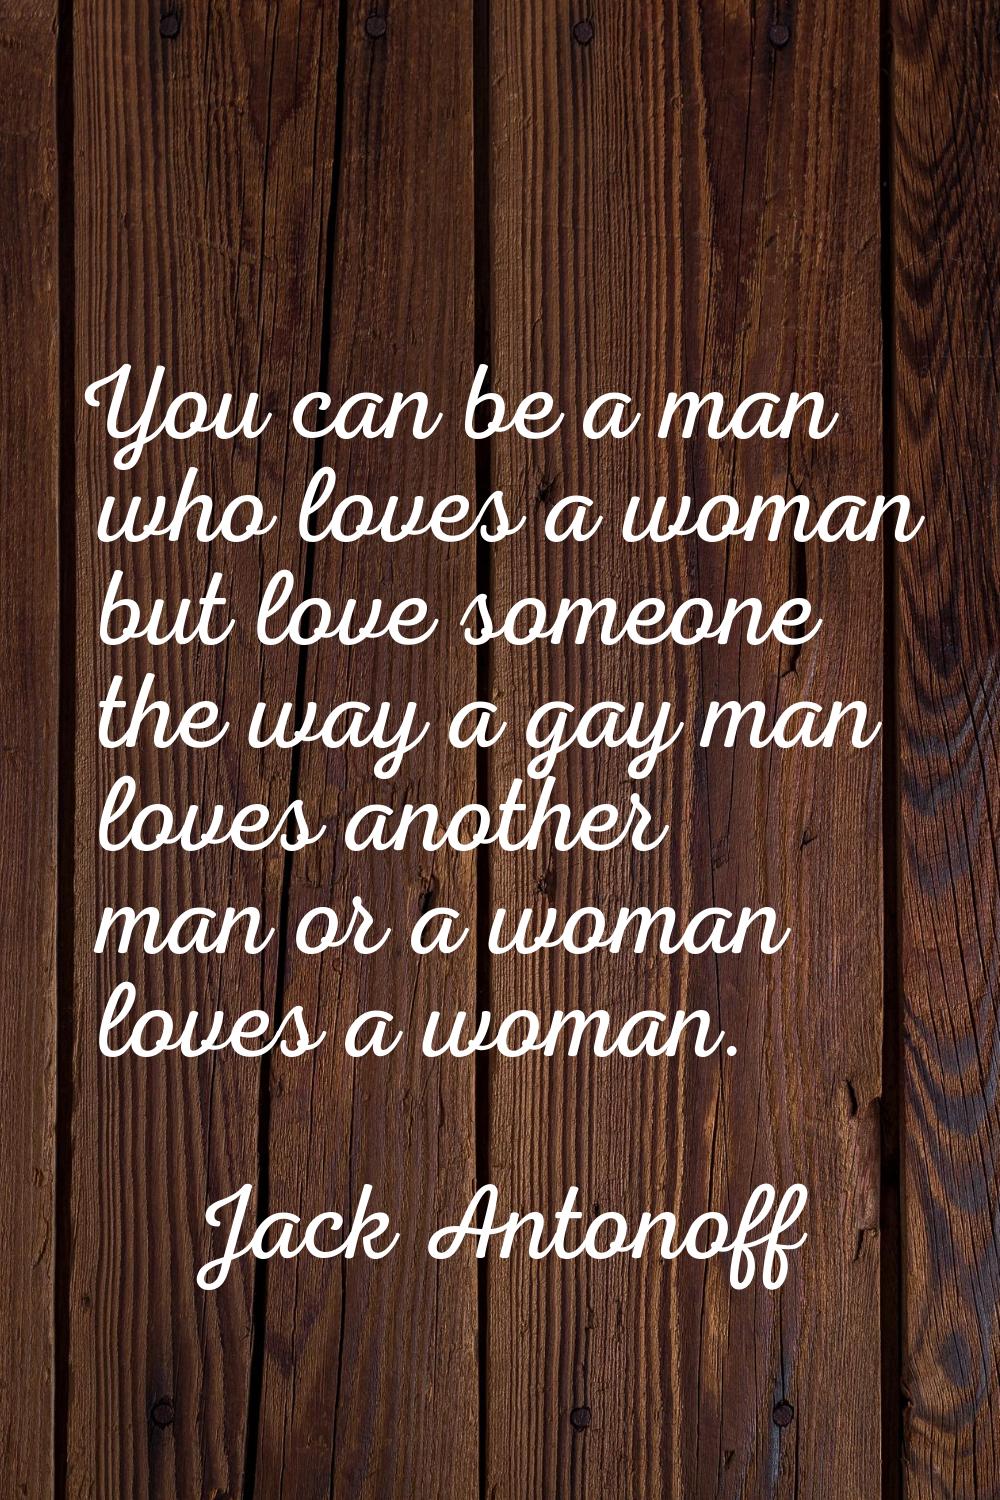 You can be a man who loves a woman but love someone the way a gay man loves another man or a woman 